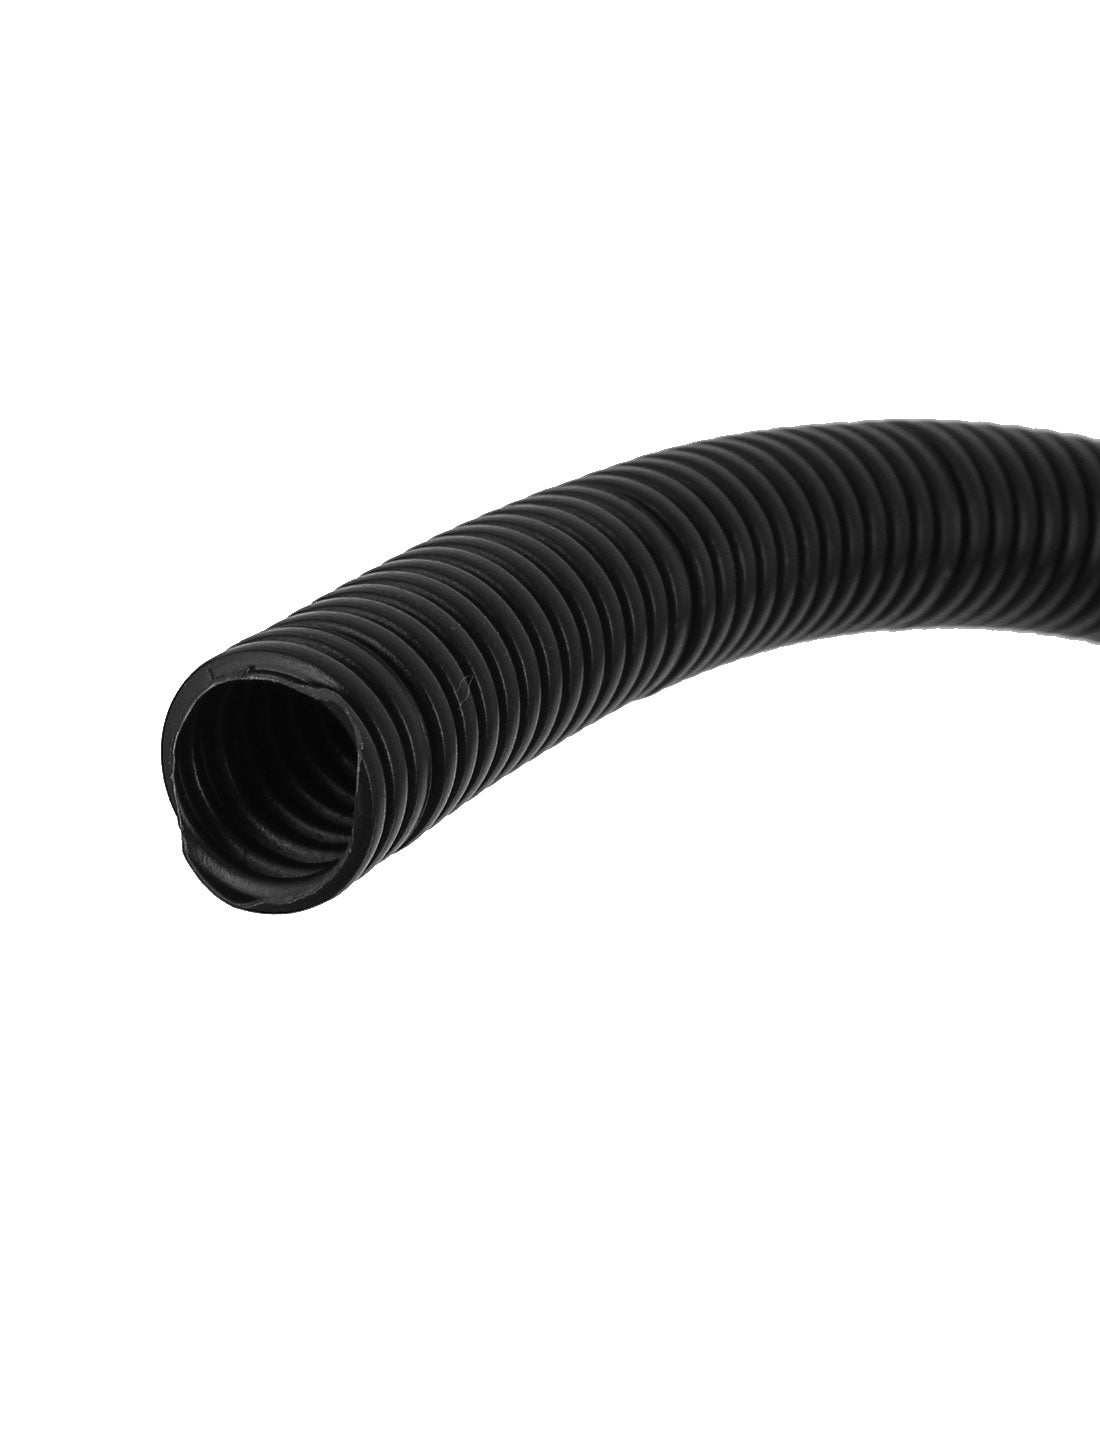 uxcell Uxcell 4.6 M 10 x 13 mm Plastic Corrugated Conduit Tube for Garden,Office Black